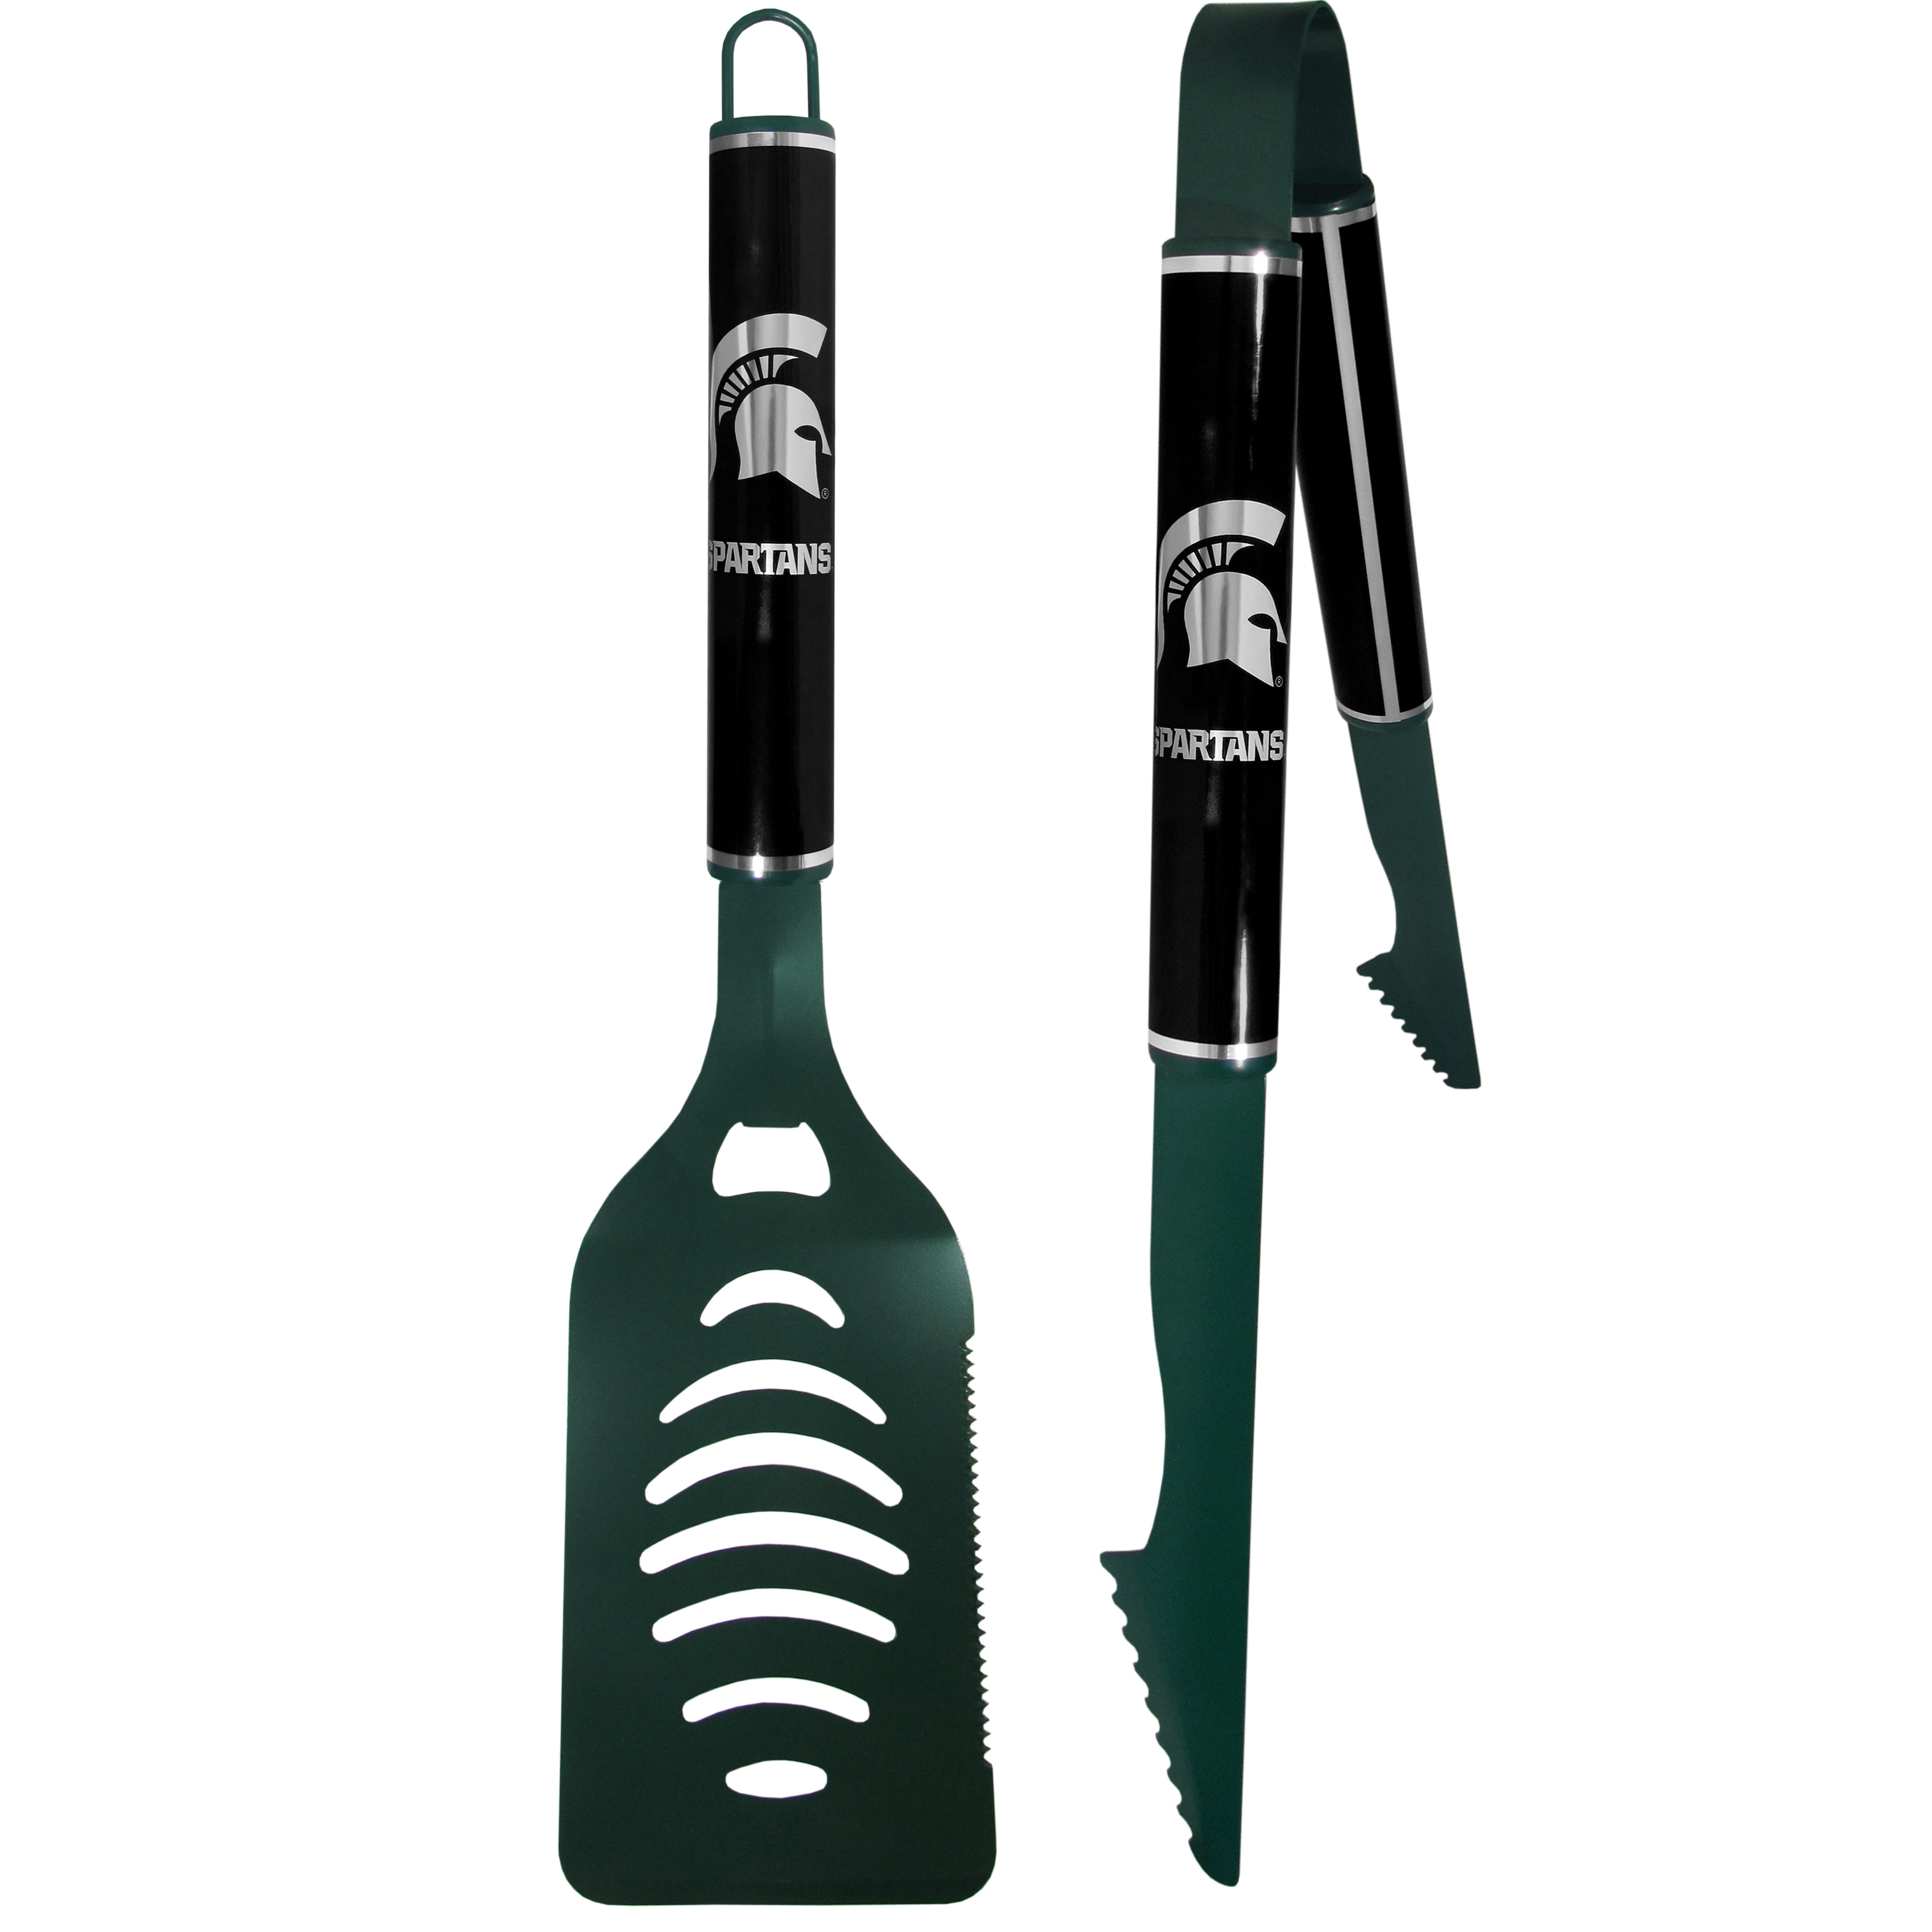 Michigan St. Spartans 2 pc Color and Black Tailgate BBQ Set